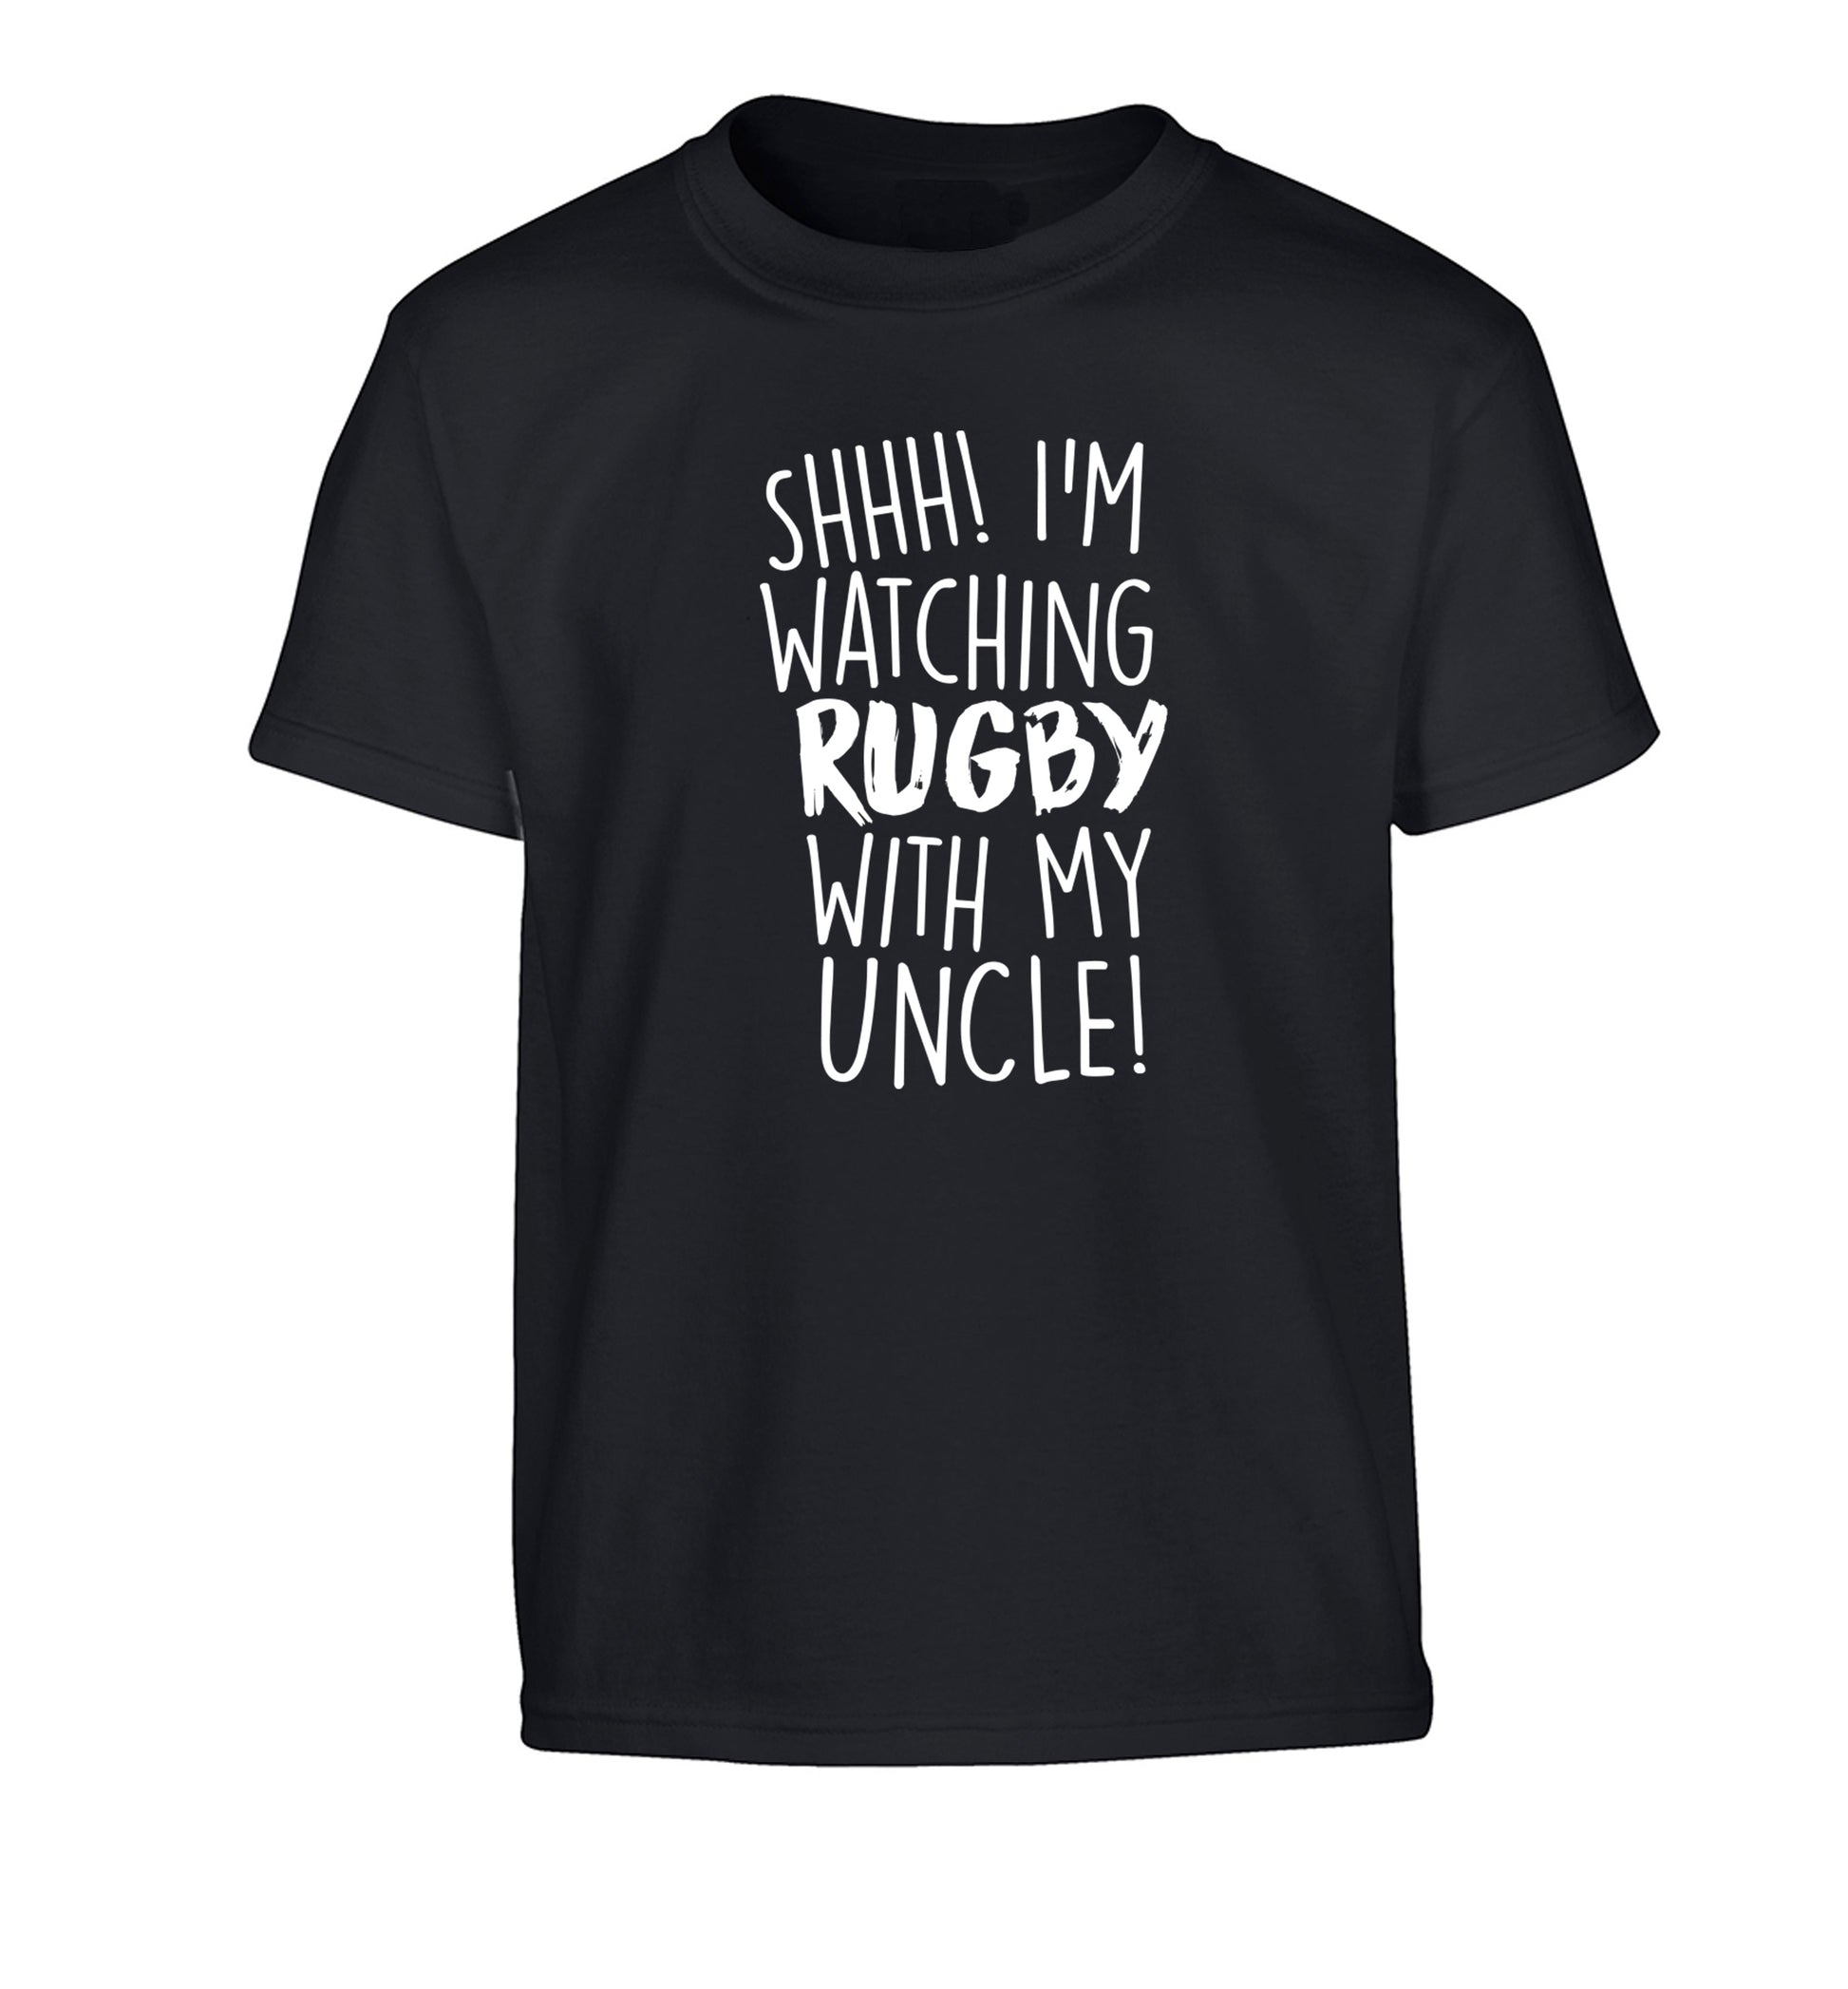 Shh.. I'm watching rugby with my uncle Children's black Tshirt 12-13 Years